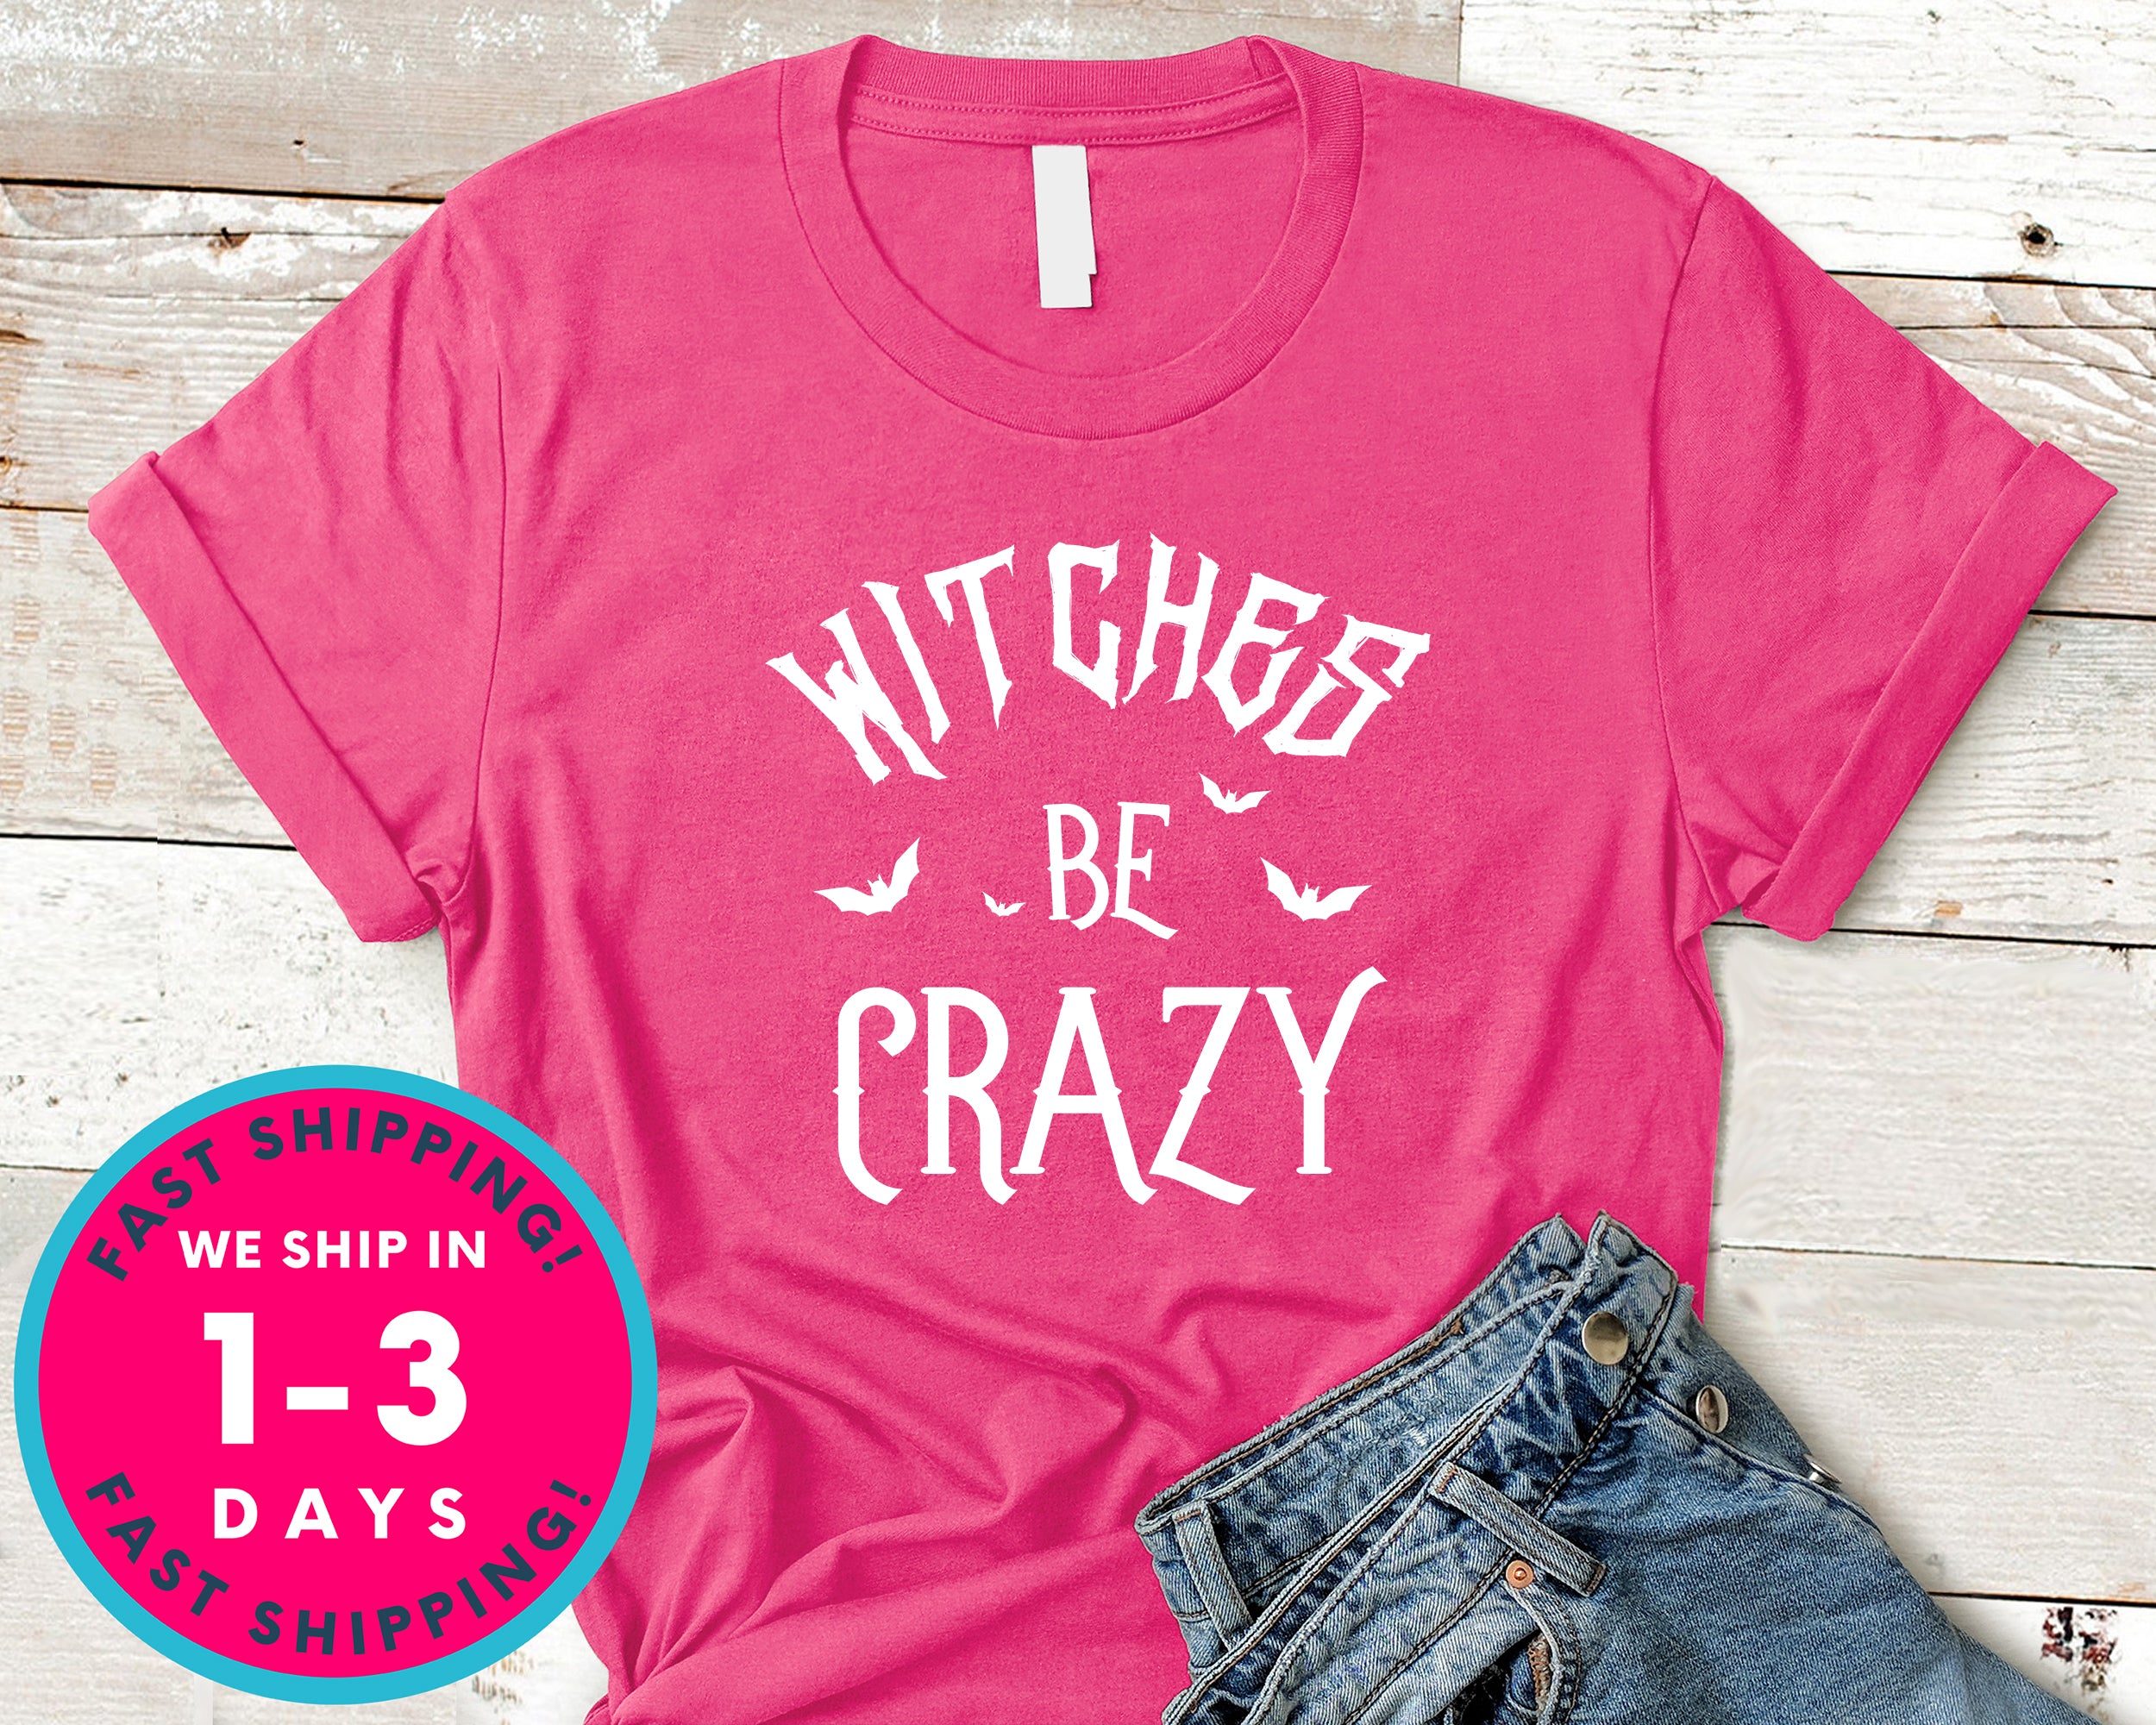 Witches Be Crazy T-Shirt - Halloween Horror Scary Shirt